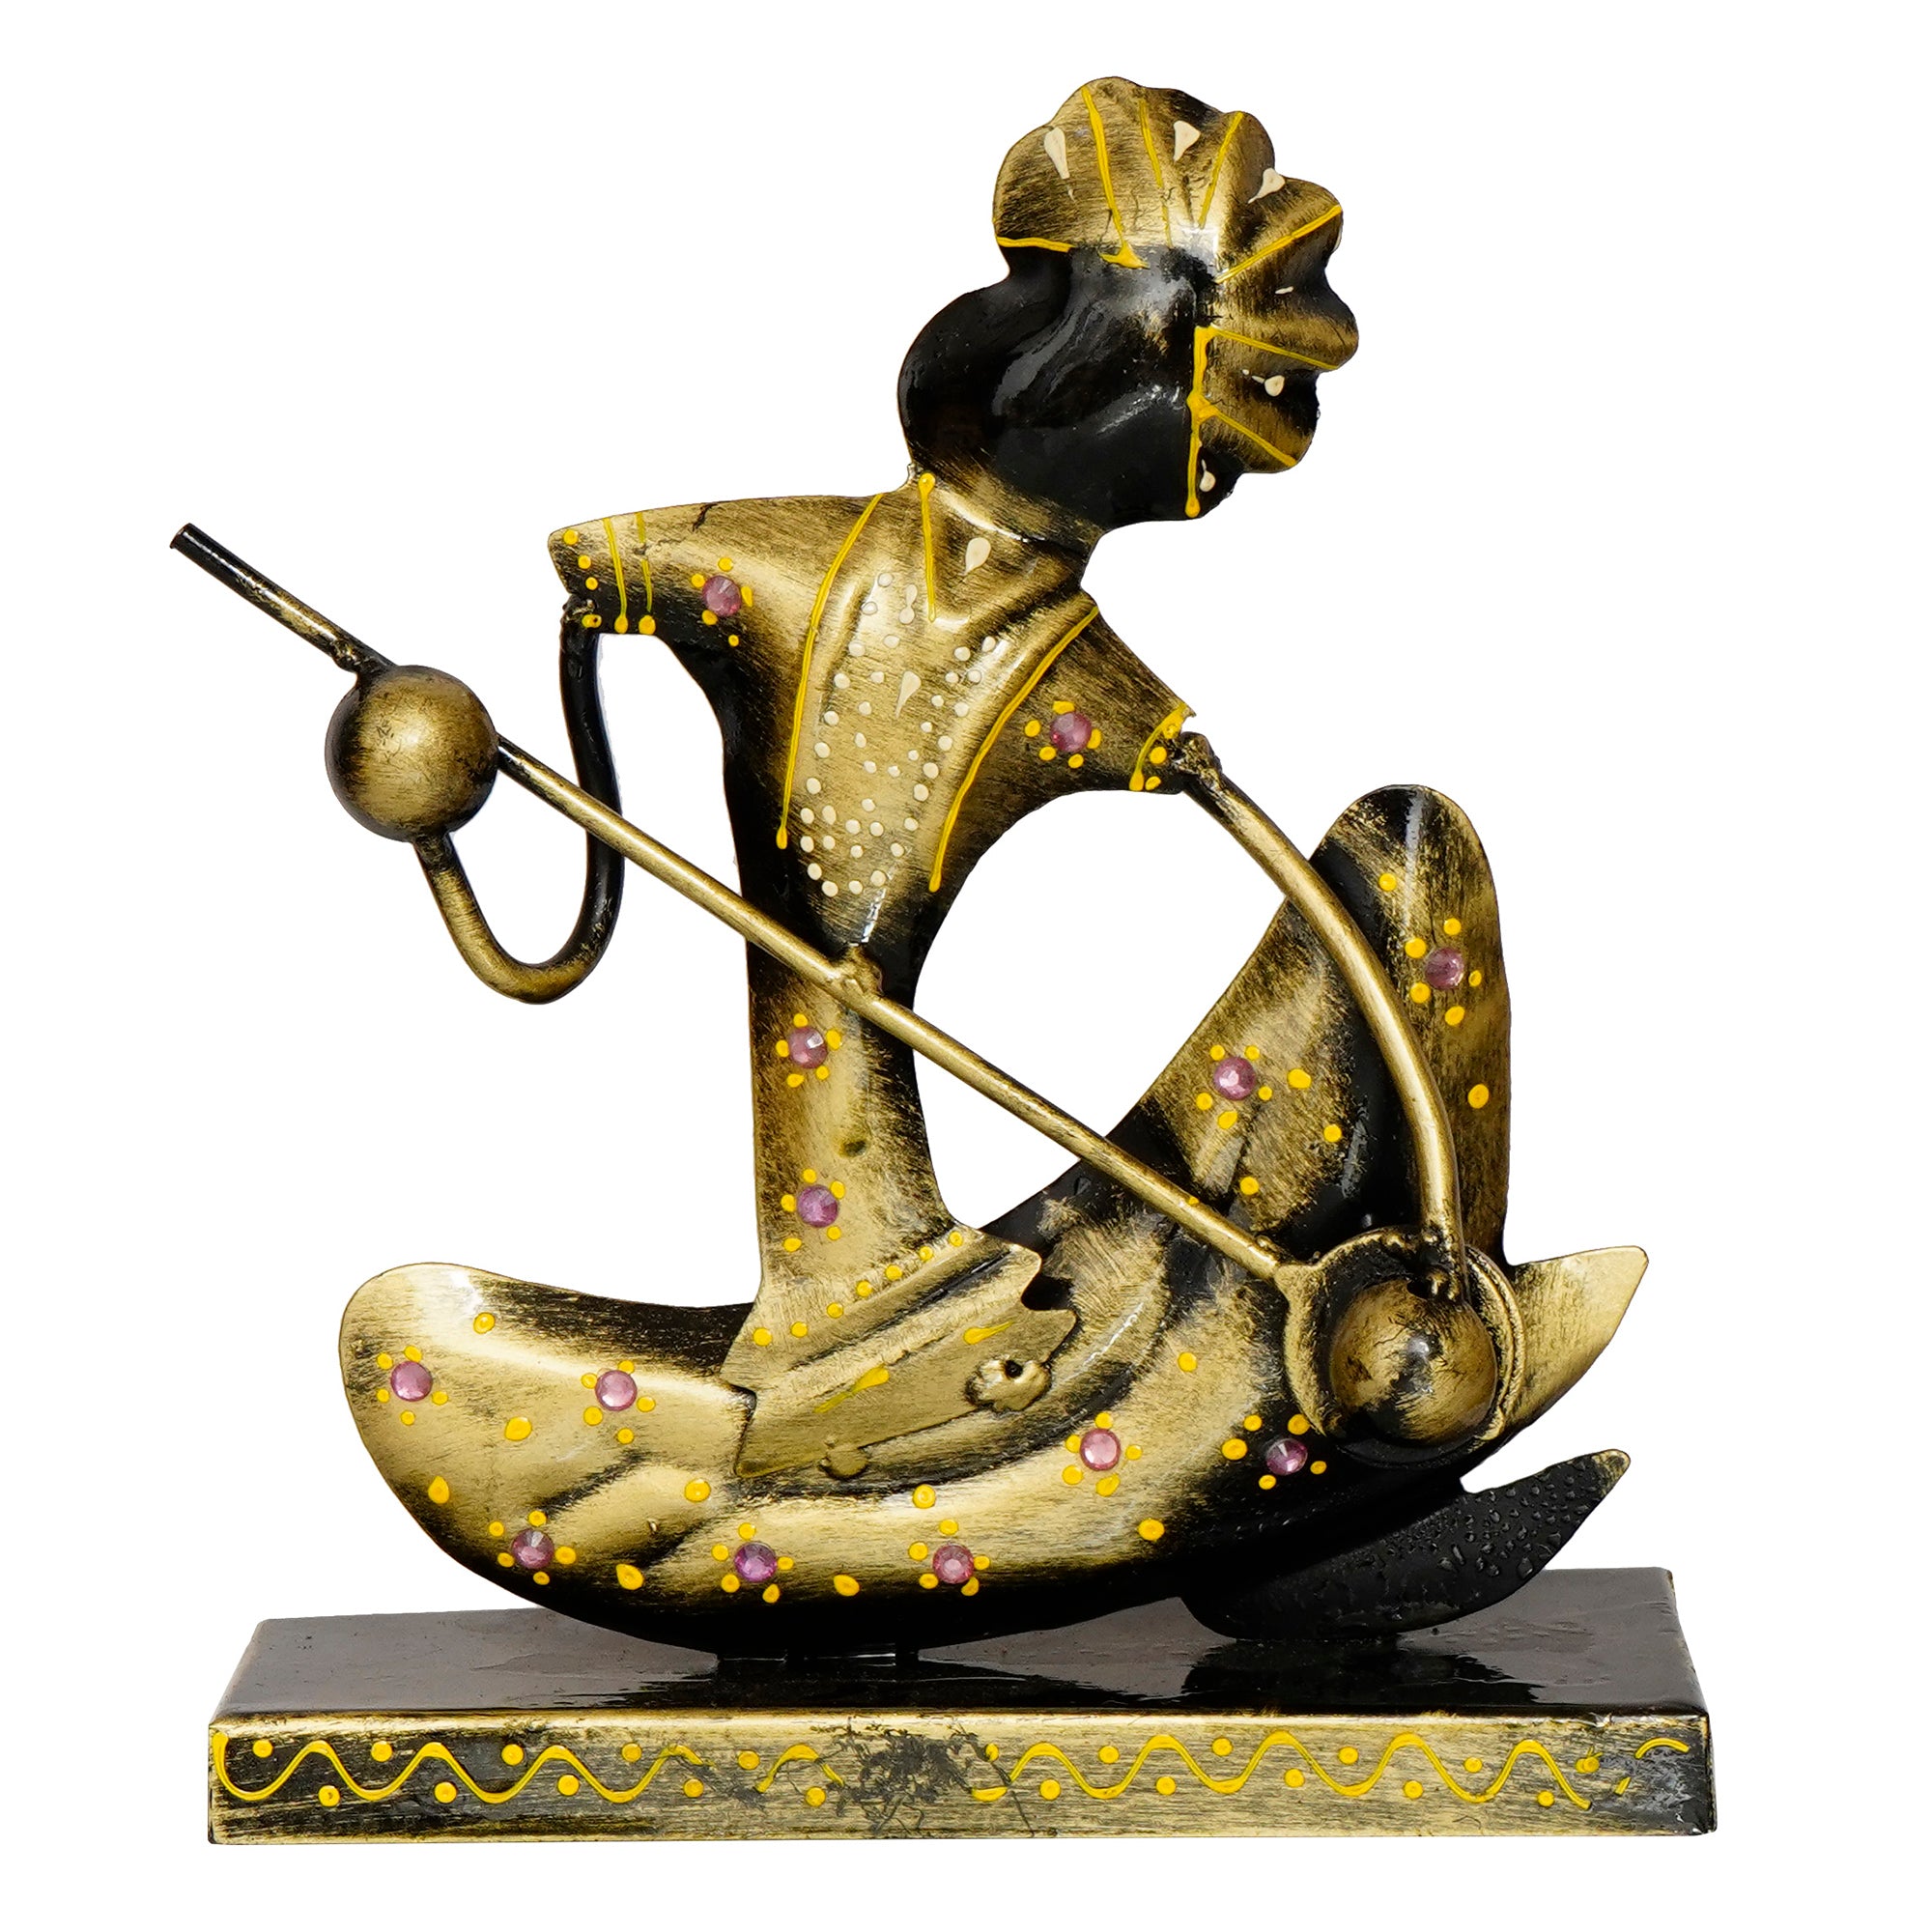 Iron Tribal Man Figurine with Paghdi Playing Banjo Musical Instrument Decorative Showpiece (Golden and Black) 4